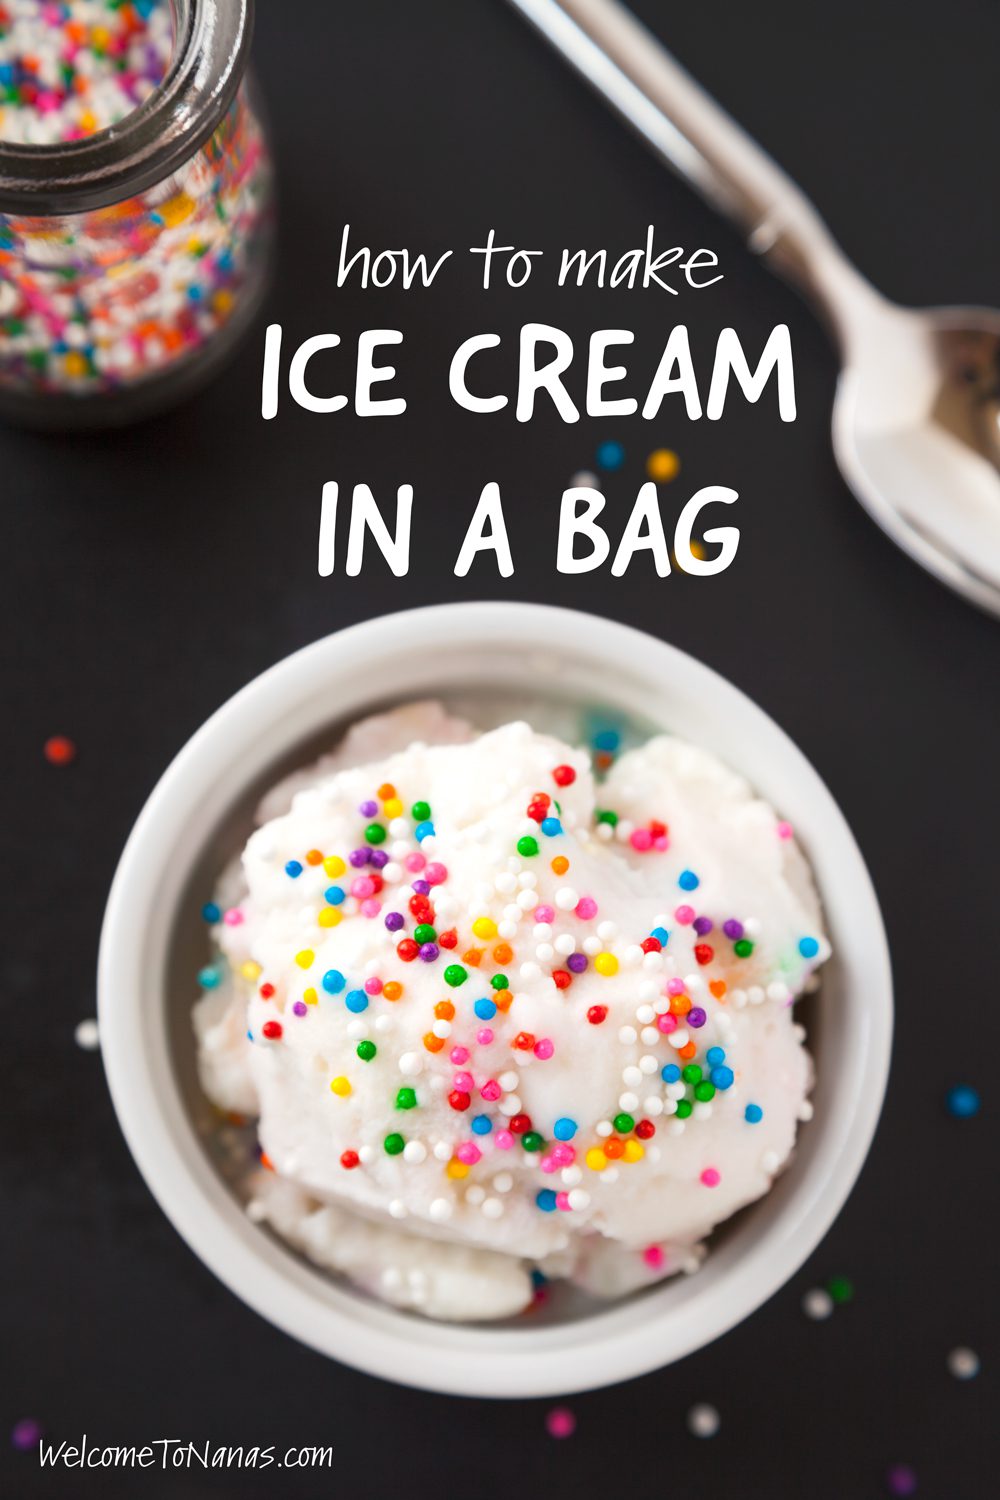 A bowl of Ice Cream made in a bag with sprinkles on top, a jar of sprinkles to the side.